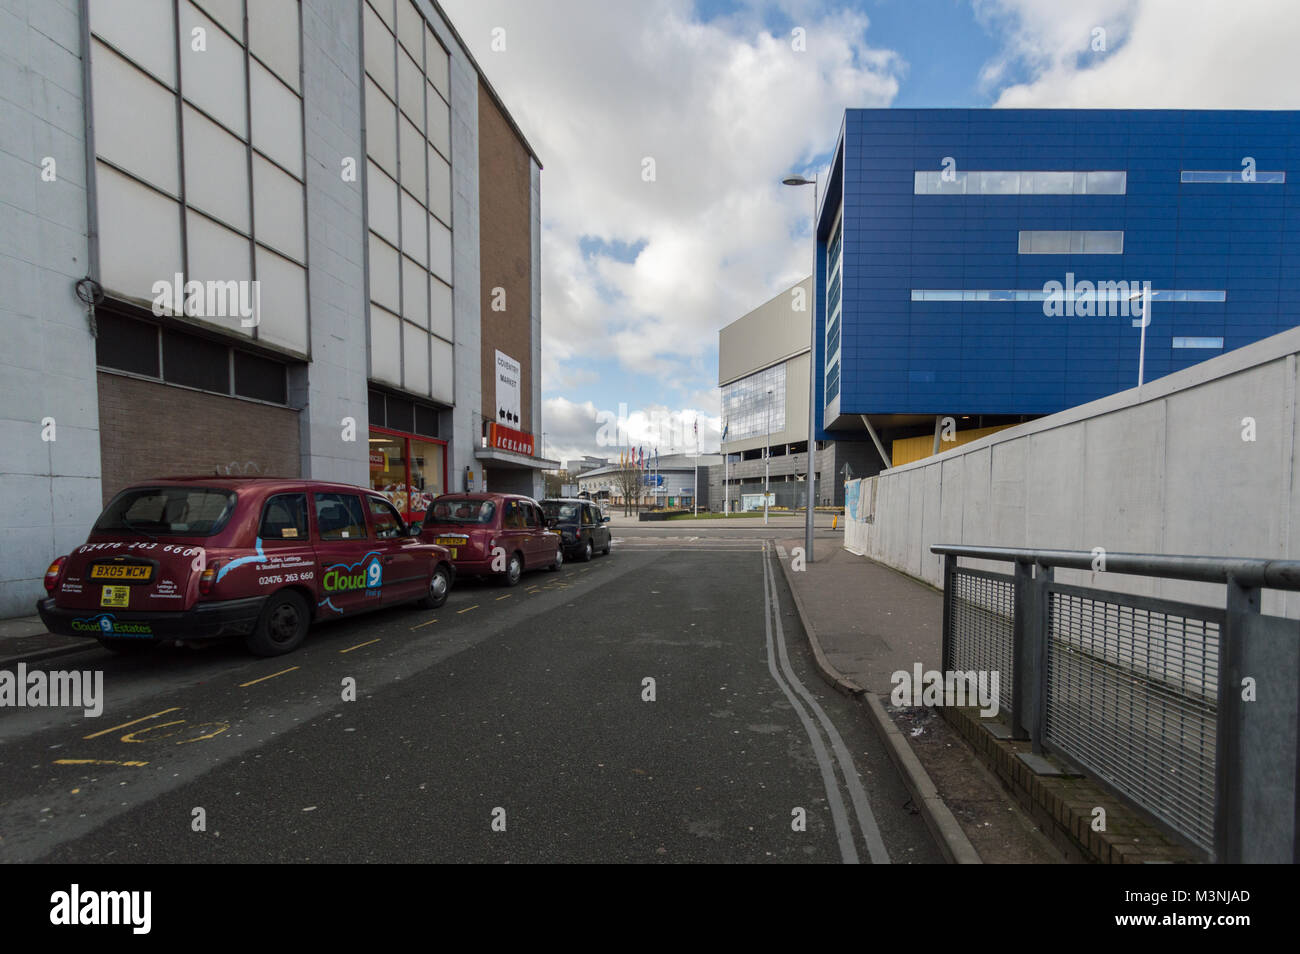 London Taxis parked outside Iceland supermarket shadowed by the Ikea building in Coventry City Centre Stock Photo